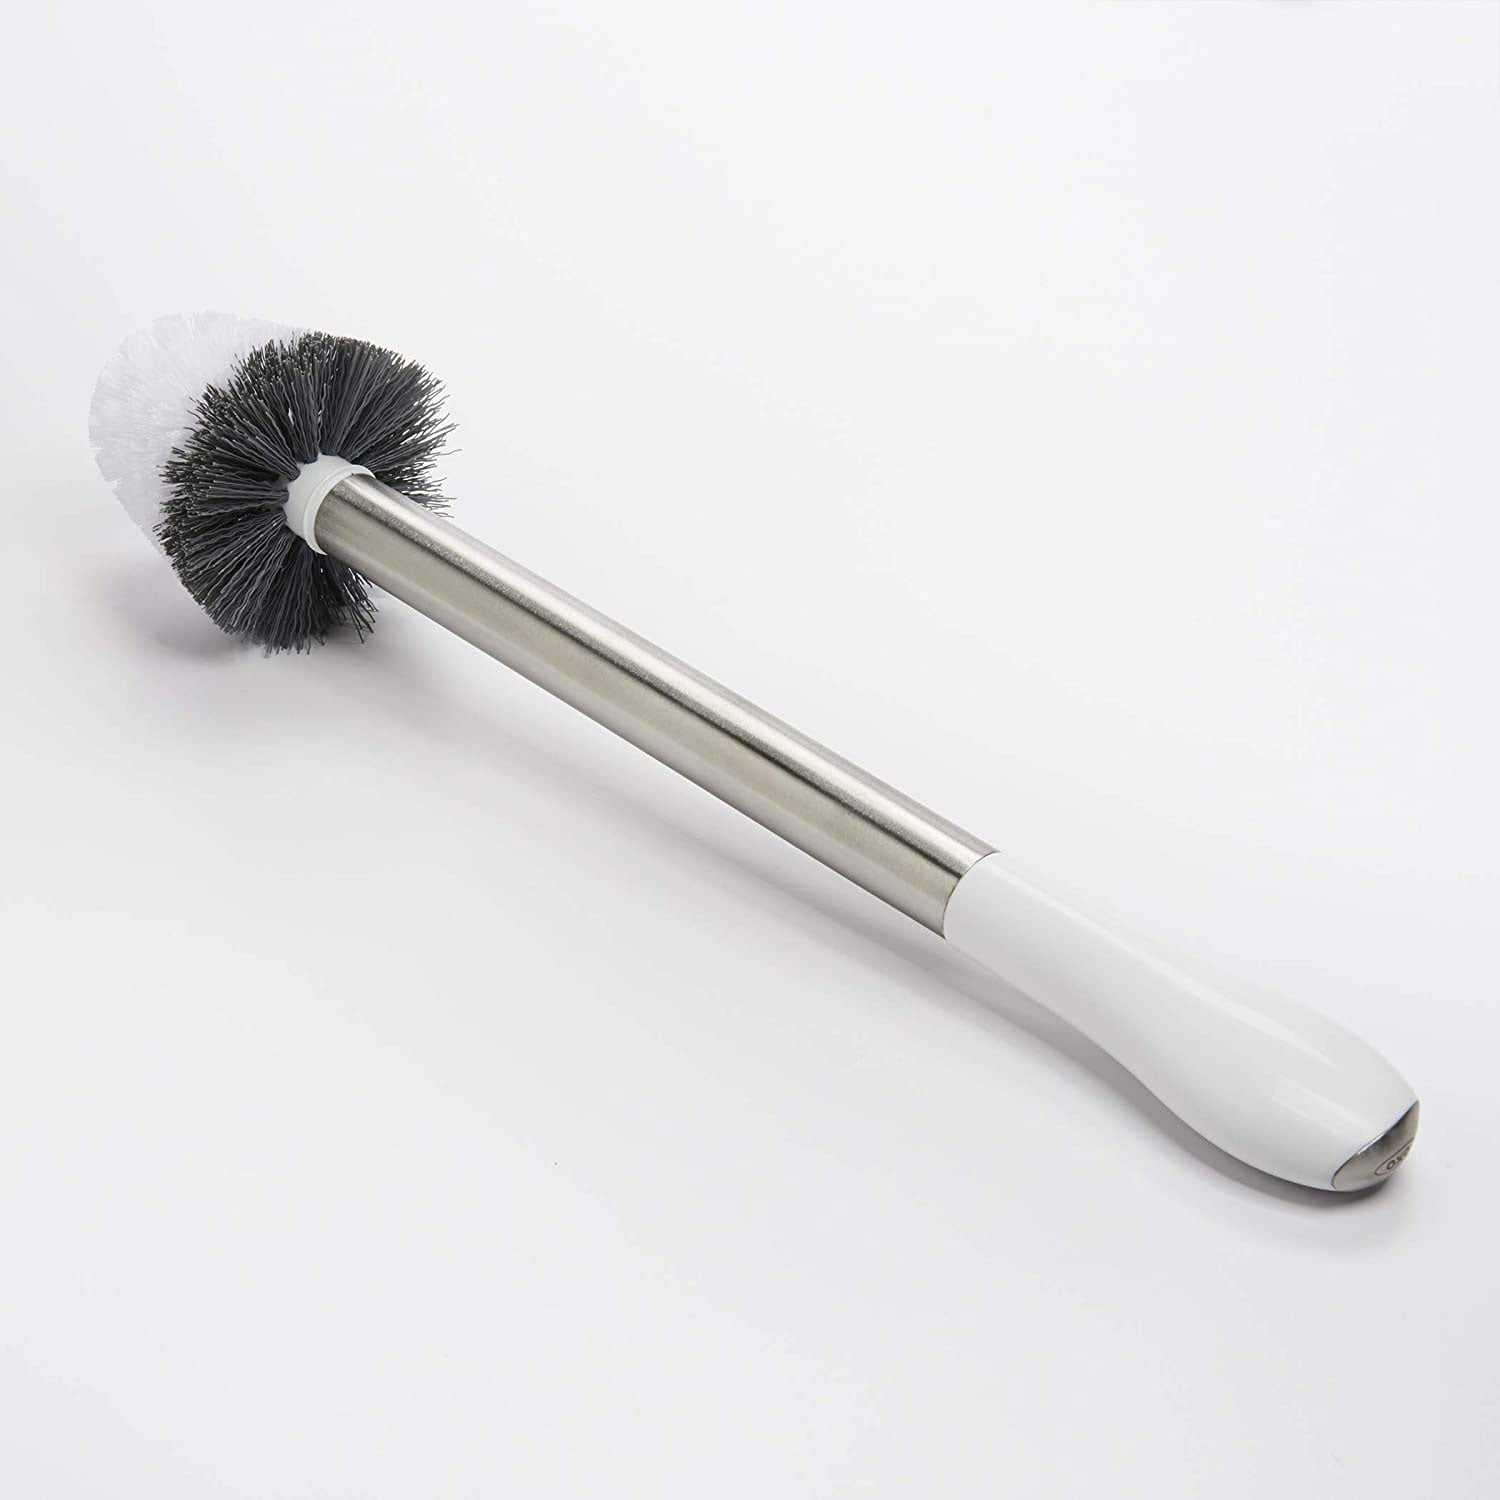 New Oxo Good Grips Toilet Brush Replacement Head Bathroom Deep Cleaning  Clean